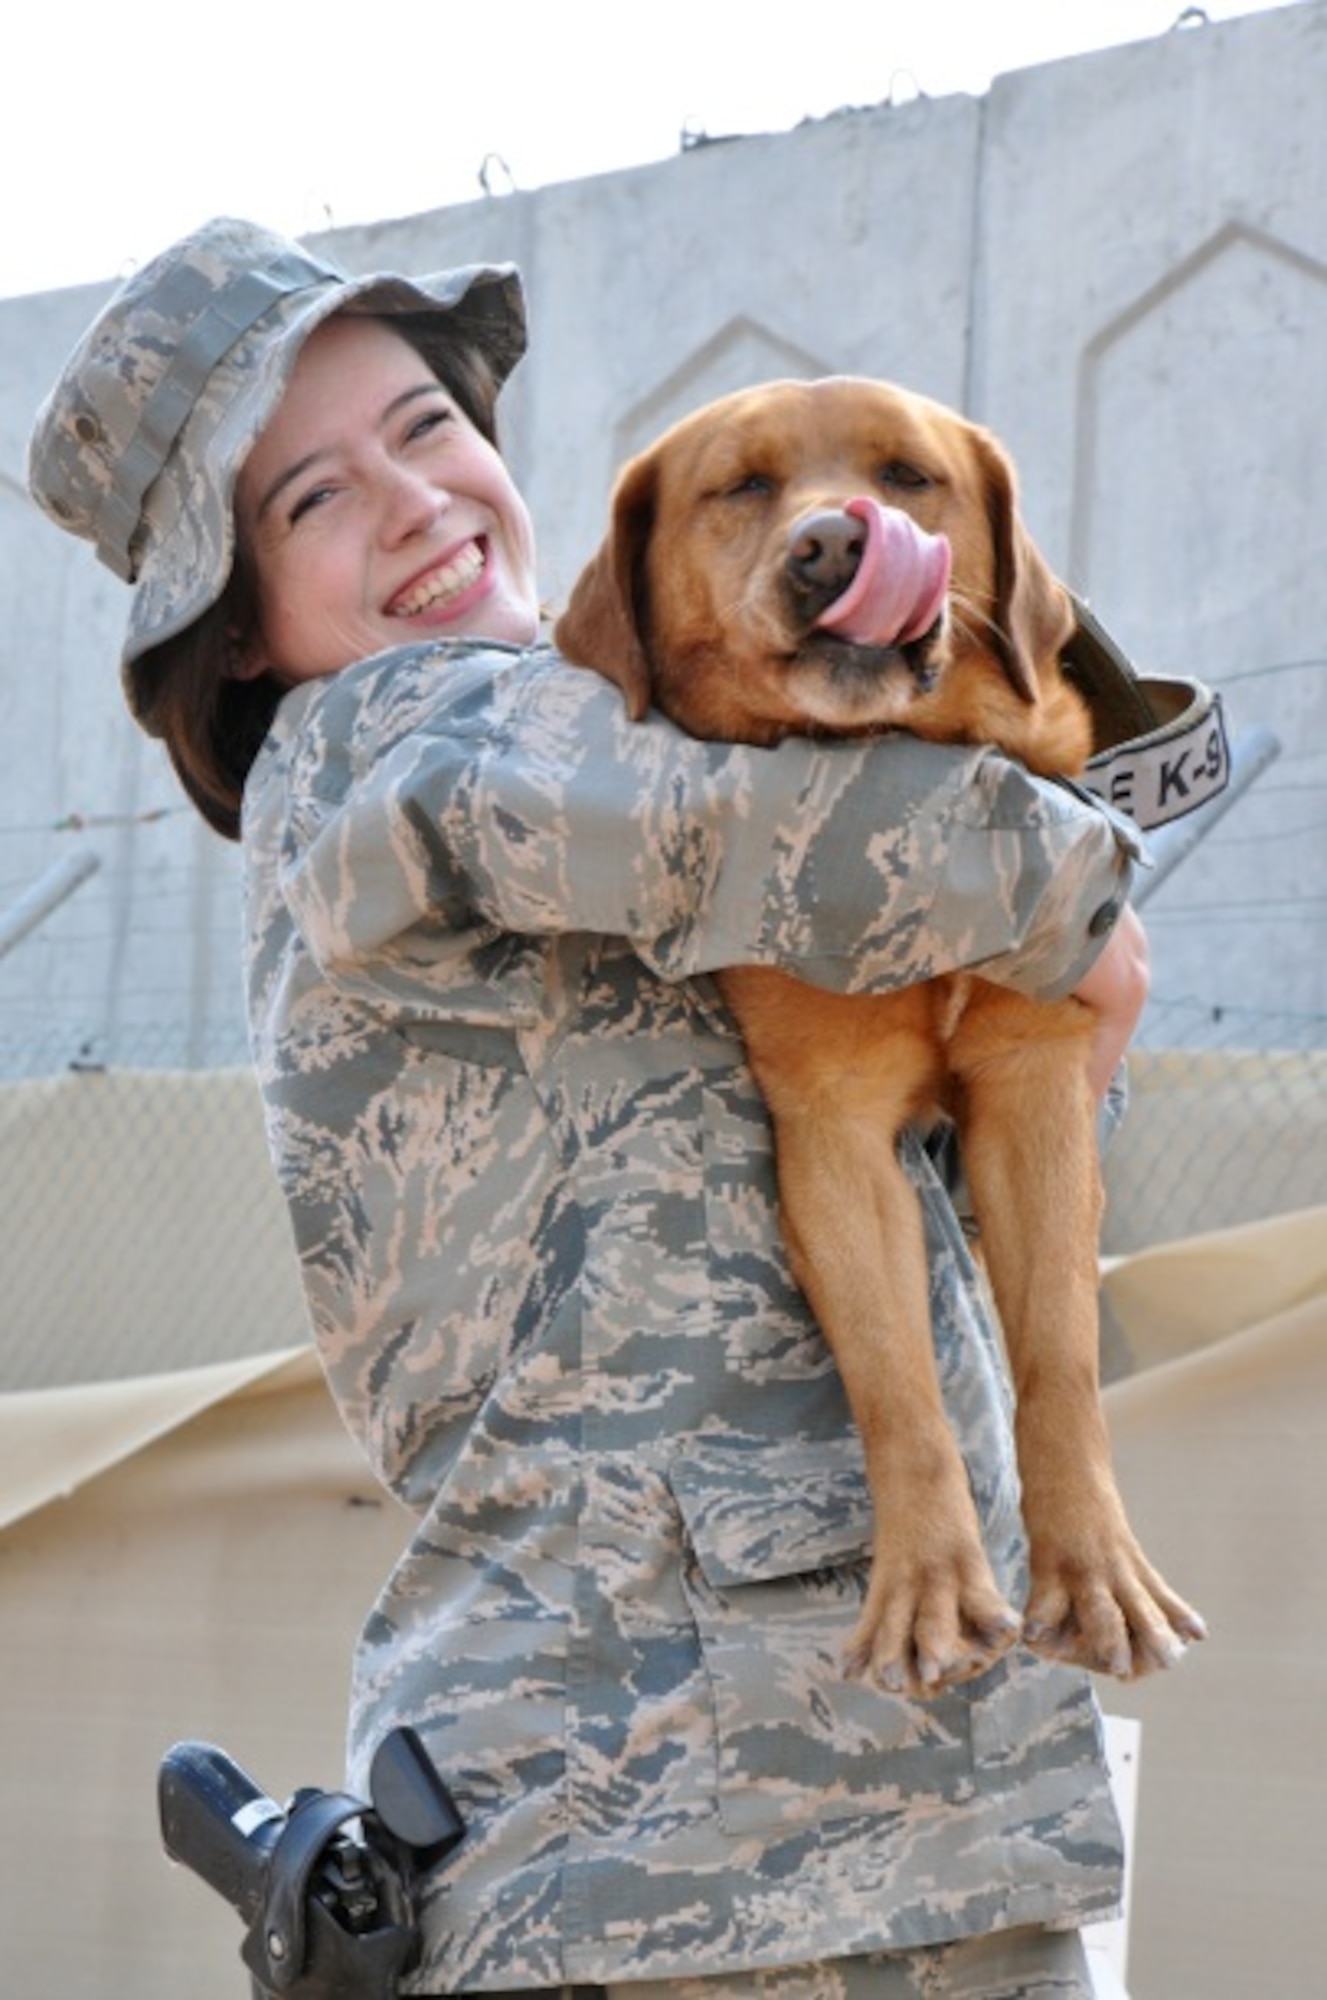 Senior Airman Samantha Baker gives her partner, Penny, a hug after successfully completing a training session. Baker is a military working dog handler deployed to the 380th Expeditionary Security Forces Squadron. (U.S. Air Force photo/Master Sgt. April Lapetoda)